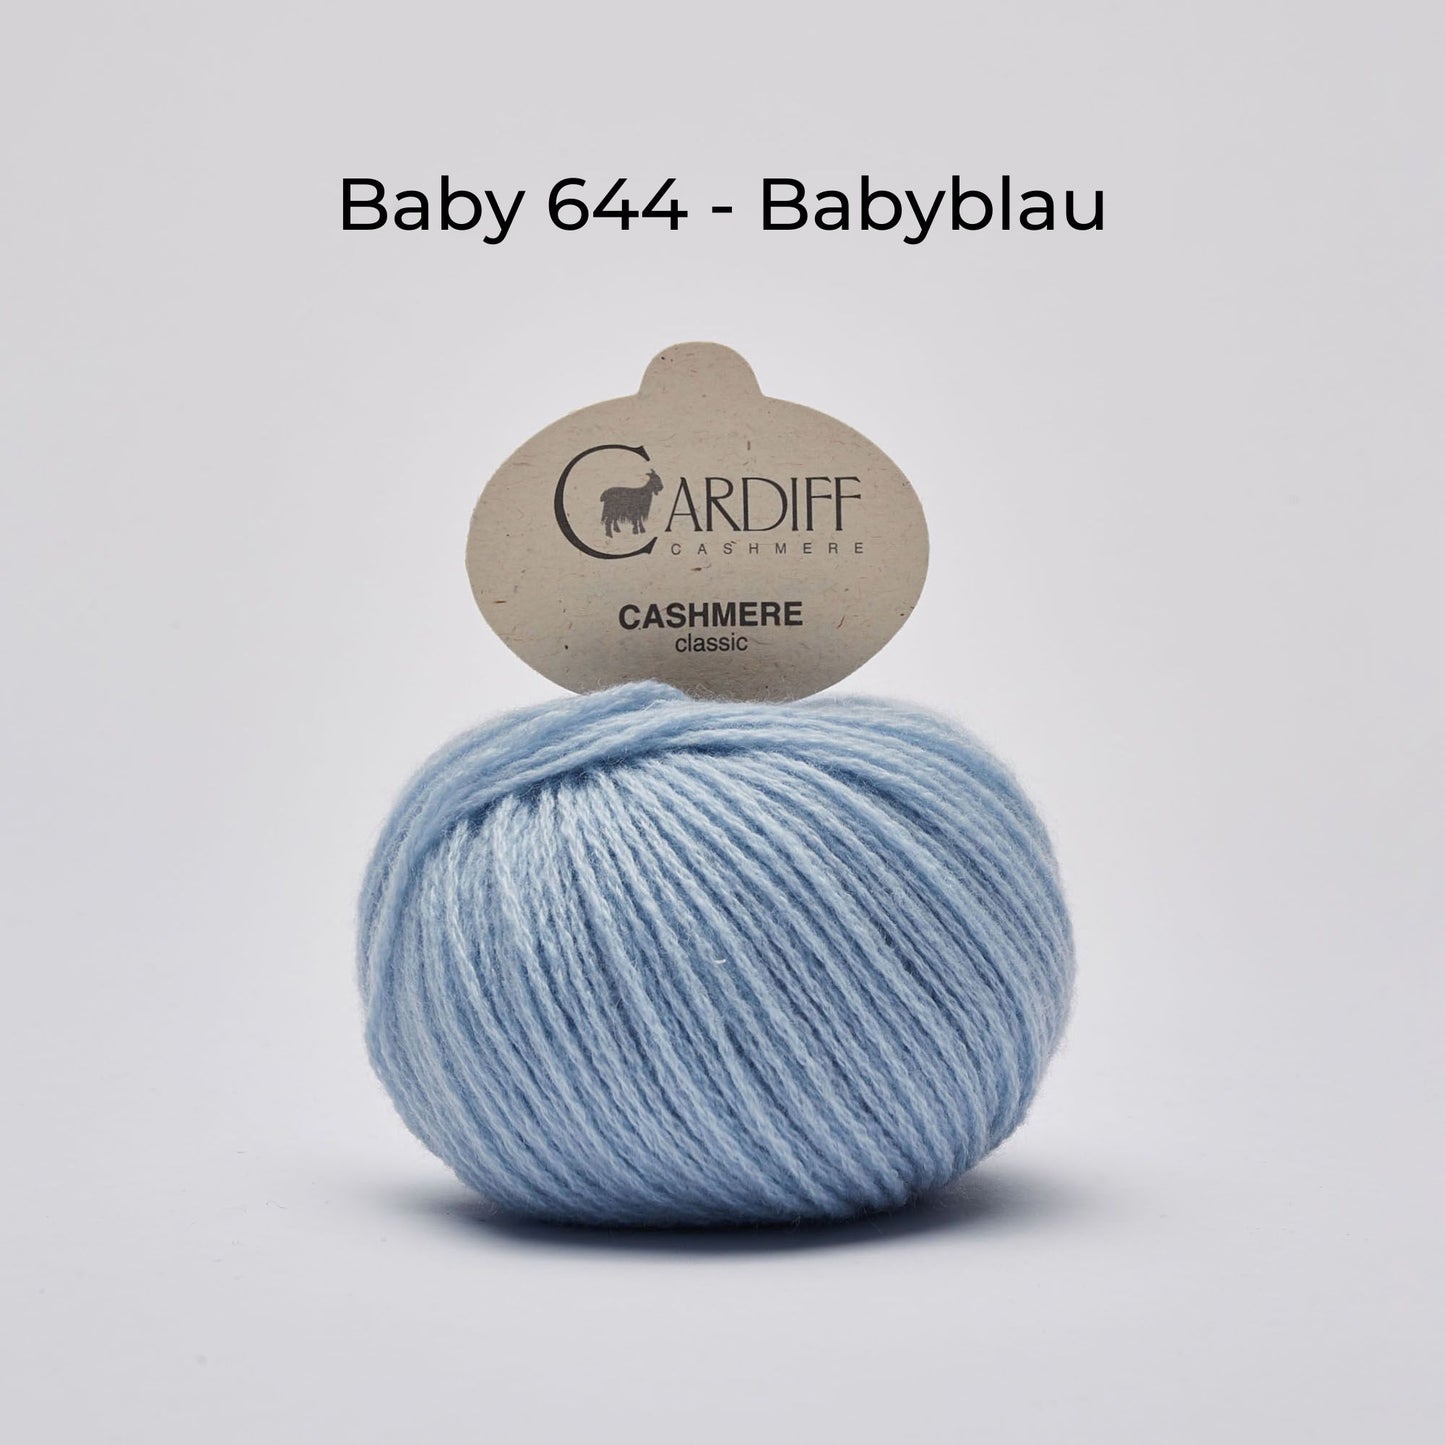 Kaschmirwolle - Cardiff Cashmere Classic 6/28 - NS 3.5-4.5 mm